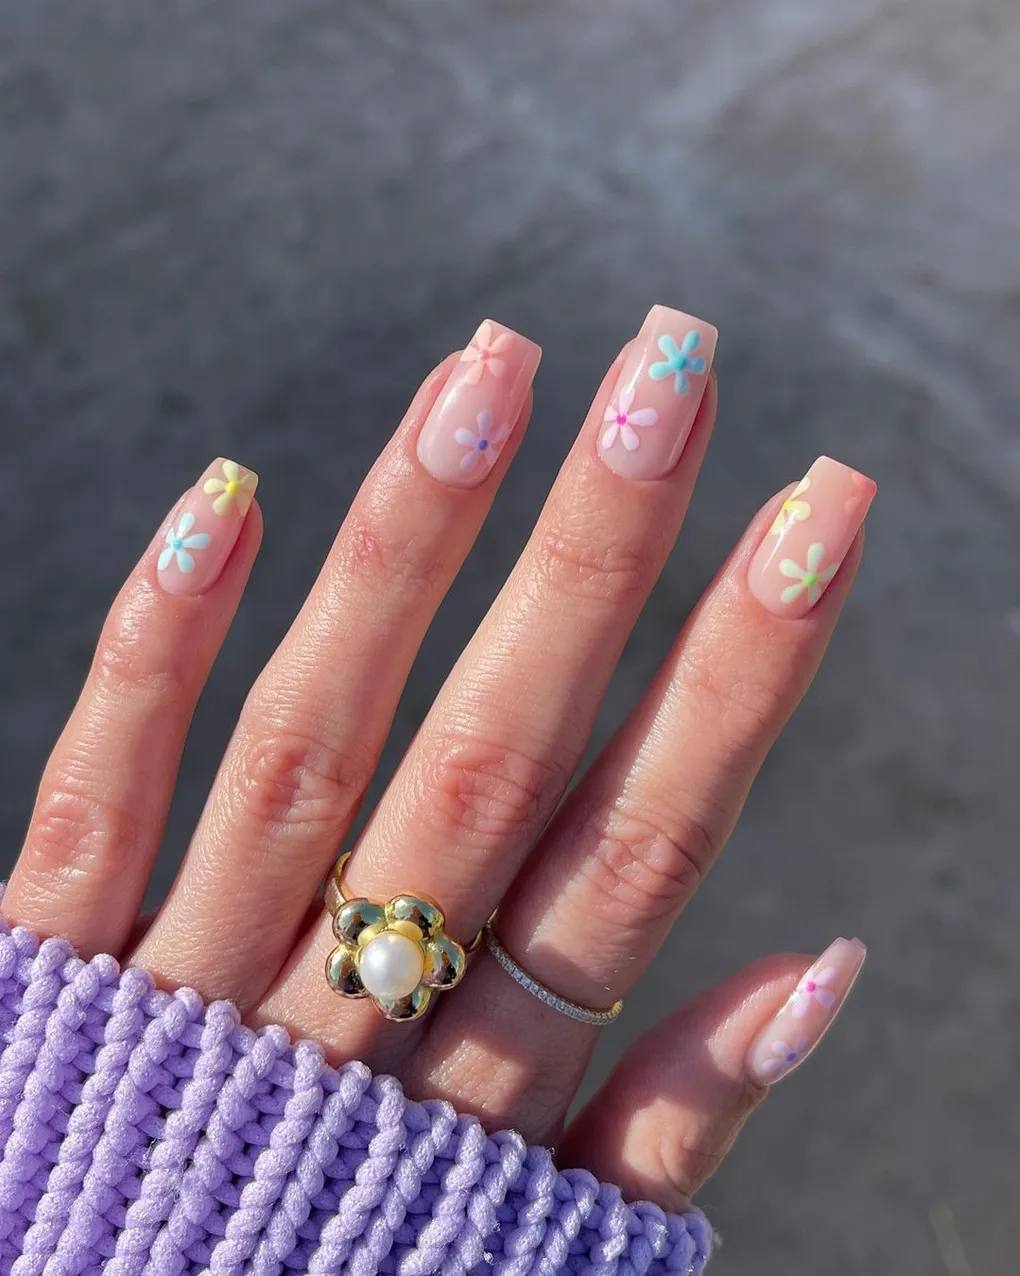 With flowers and hearts. 10 delicate spring manicure ideas that will suit all women